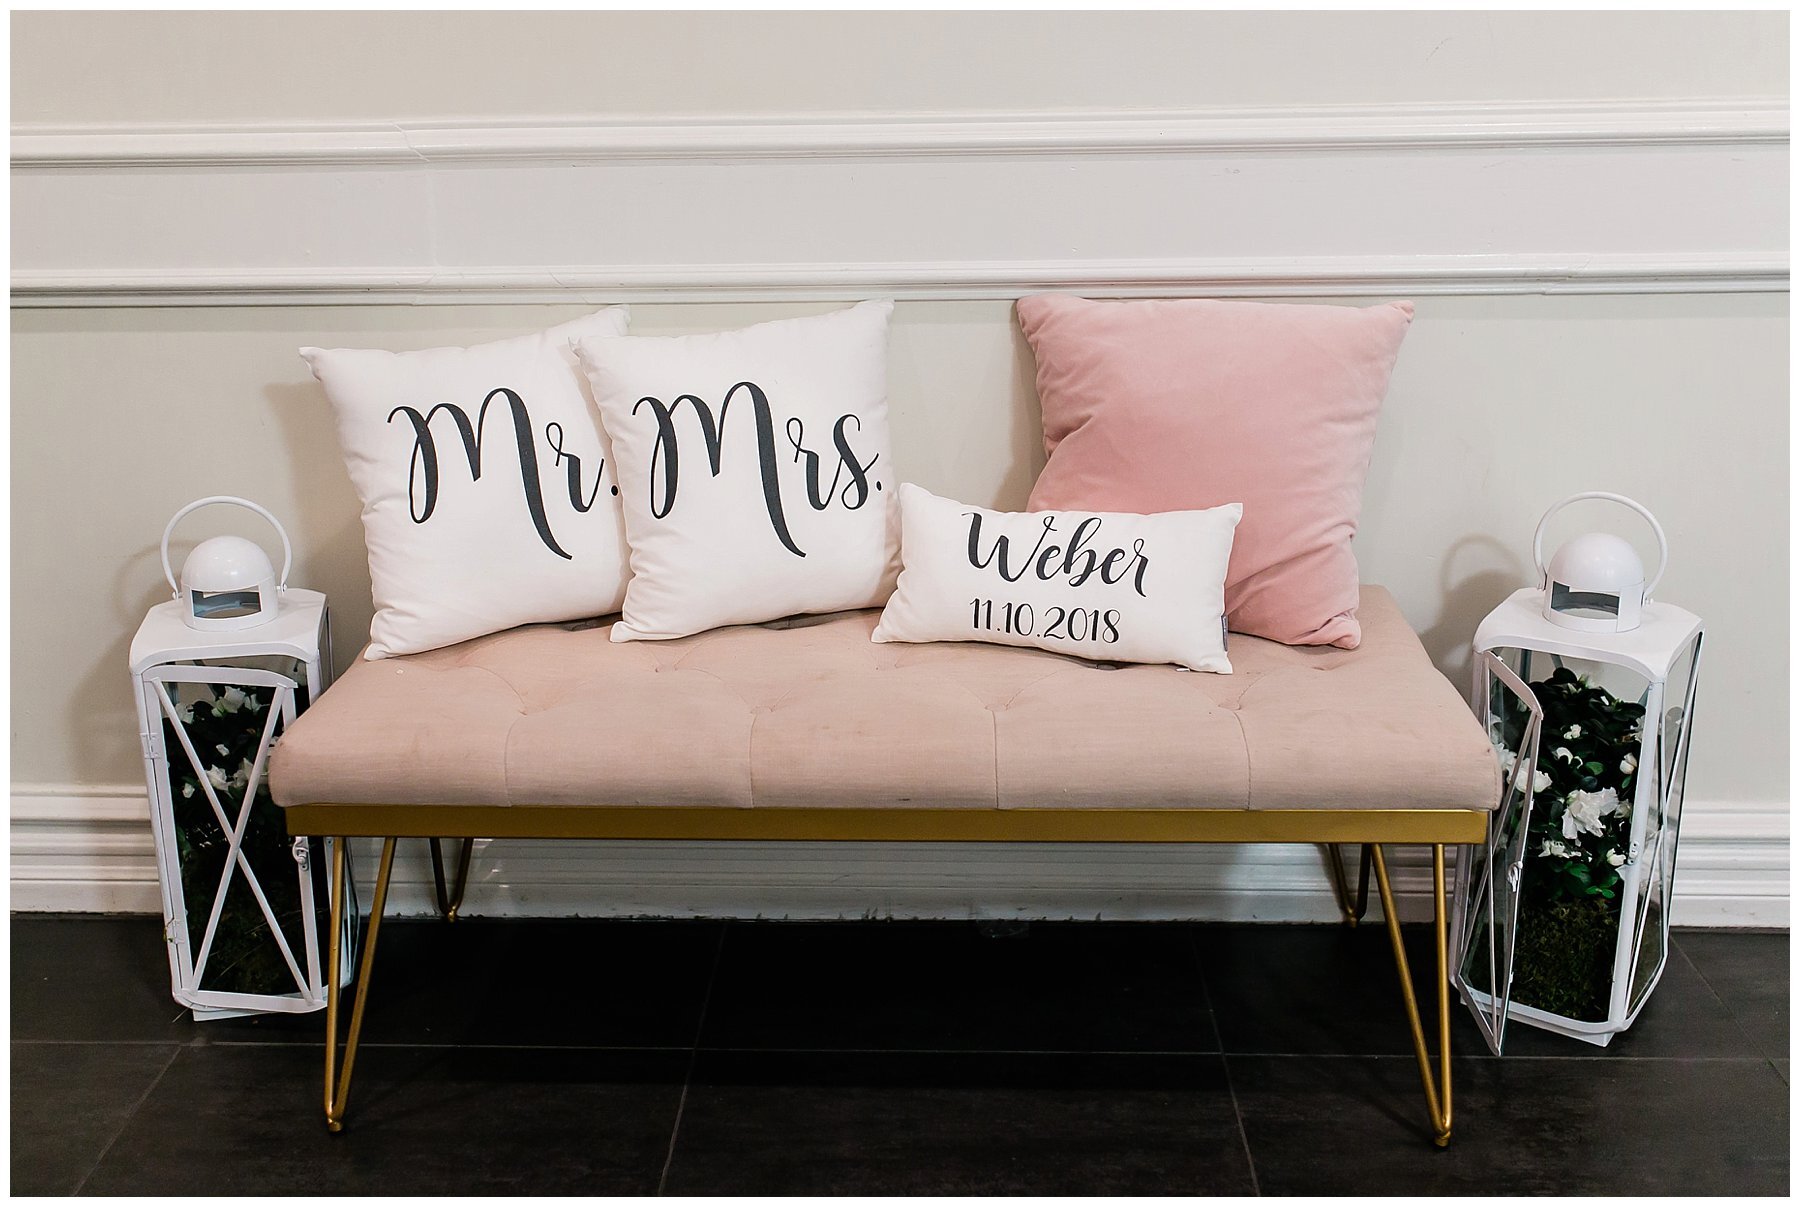  pillows on the hallway bench that say mr and mrs weber with the wedding date 